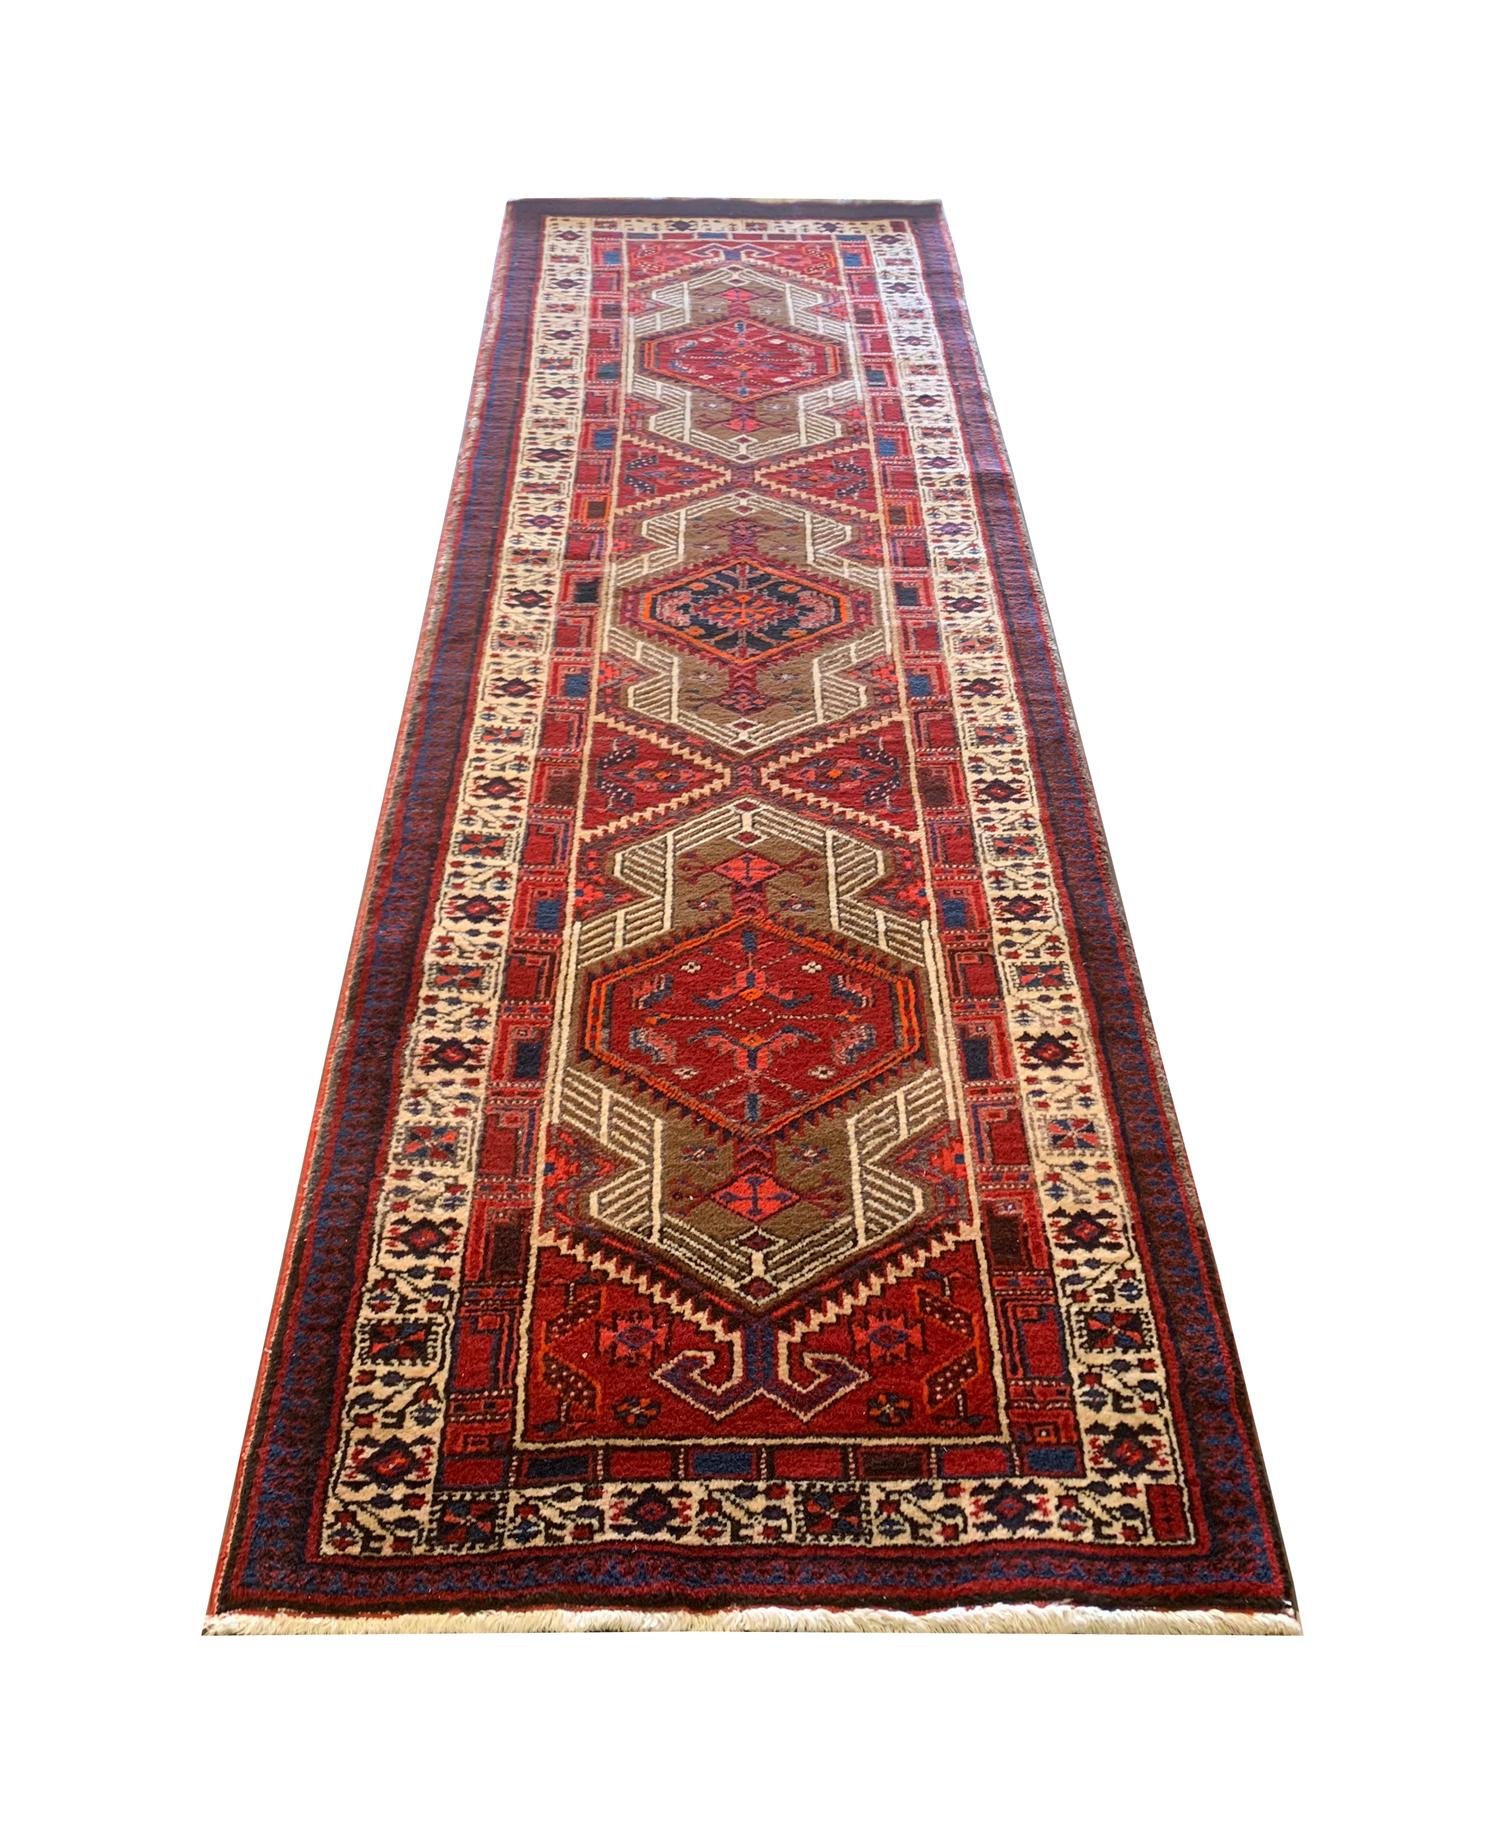 This bold wool rug is an excellent example of runner rugs woven in the early 20th century, circa 1930. The central design features a trio of medallions delicately woven in red and blue accents of beige and cream. An eye-catching repeating pattern